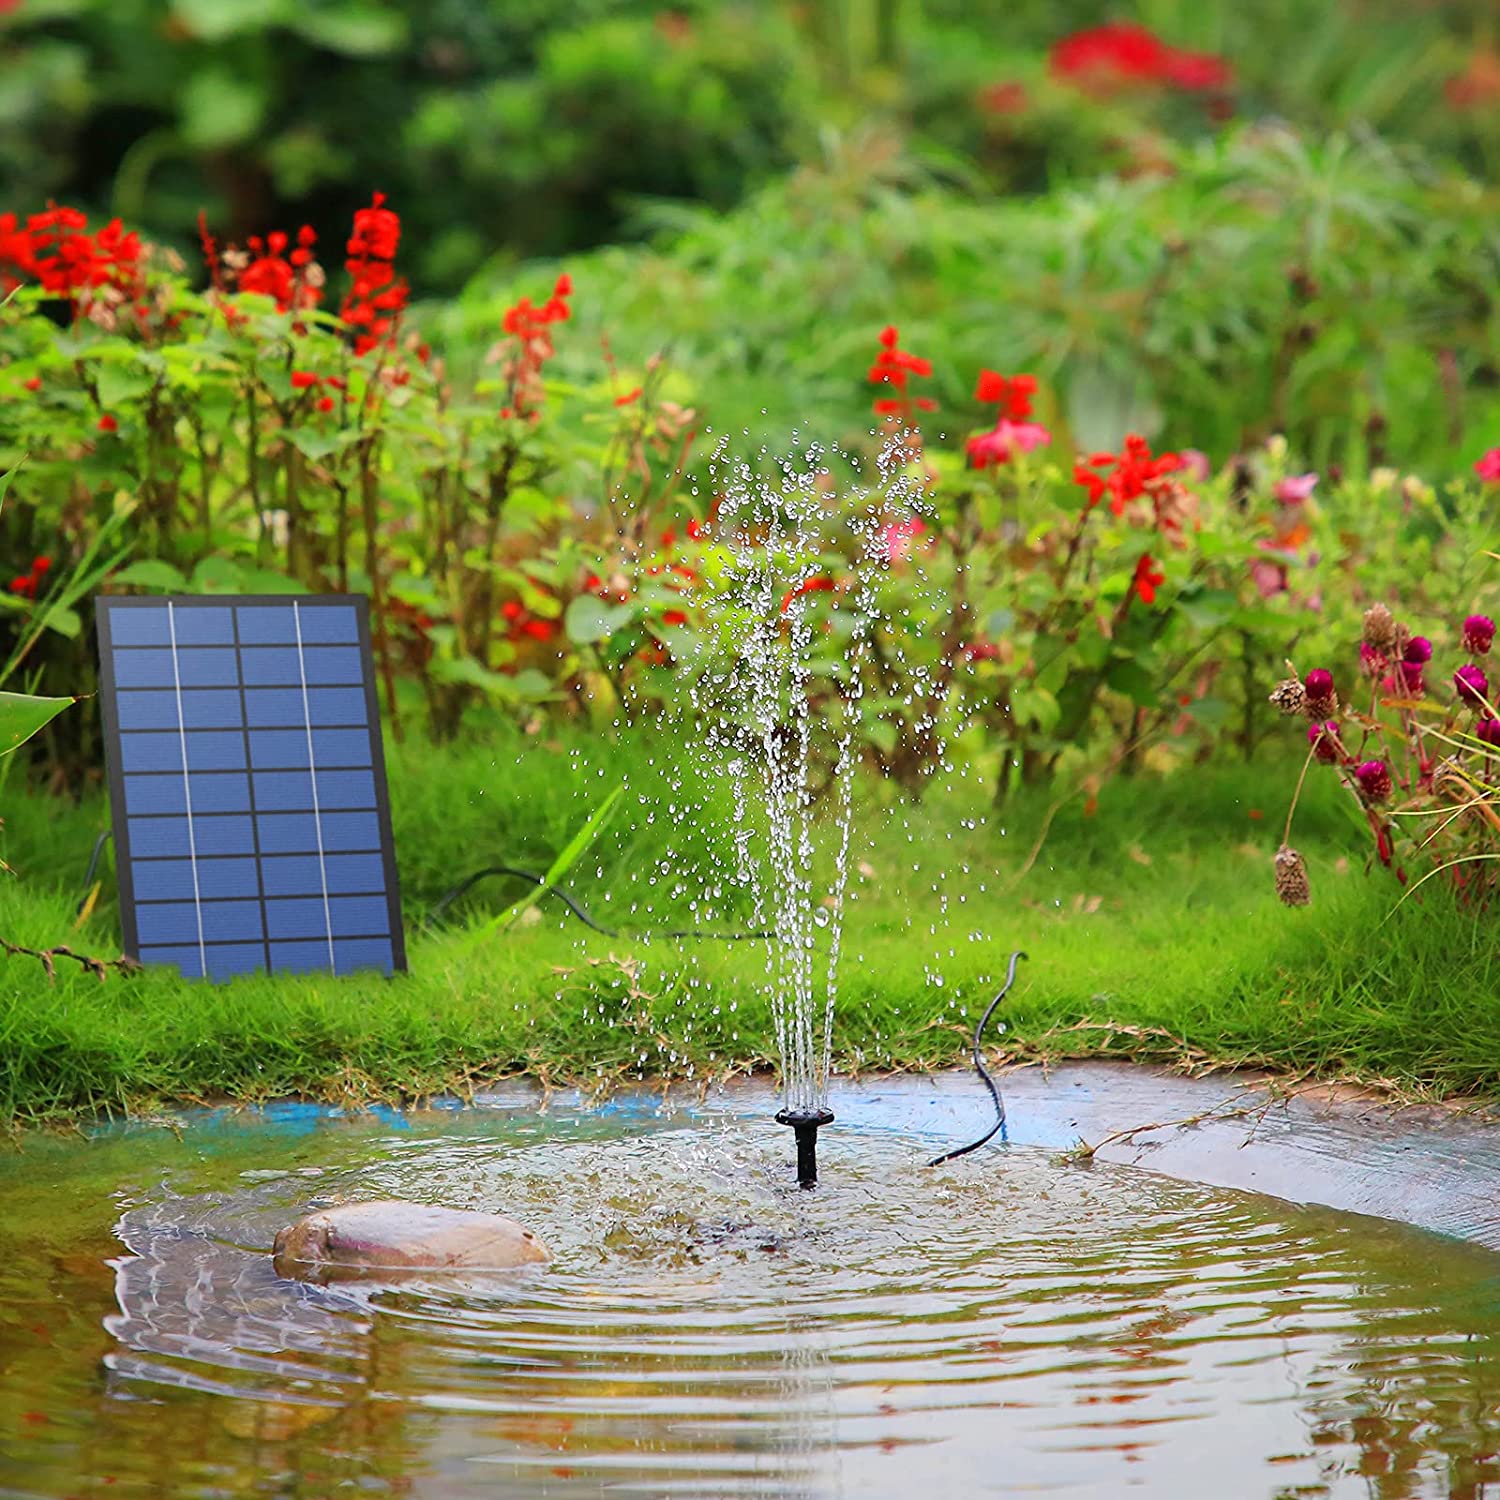 2.5W Solar Fountain Pump - with 6Nozzles and 4ft Water Pipe,Solar Powered Pump for Bird Bath,Pond,Garden and Other Places